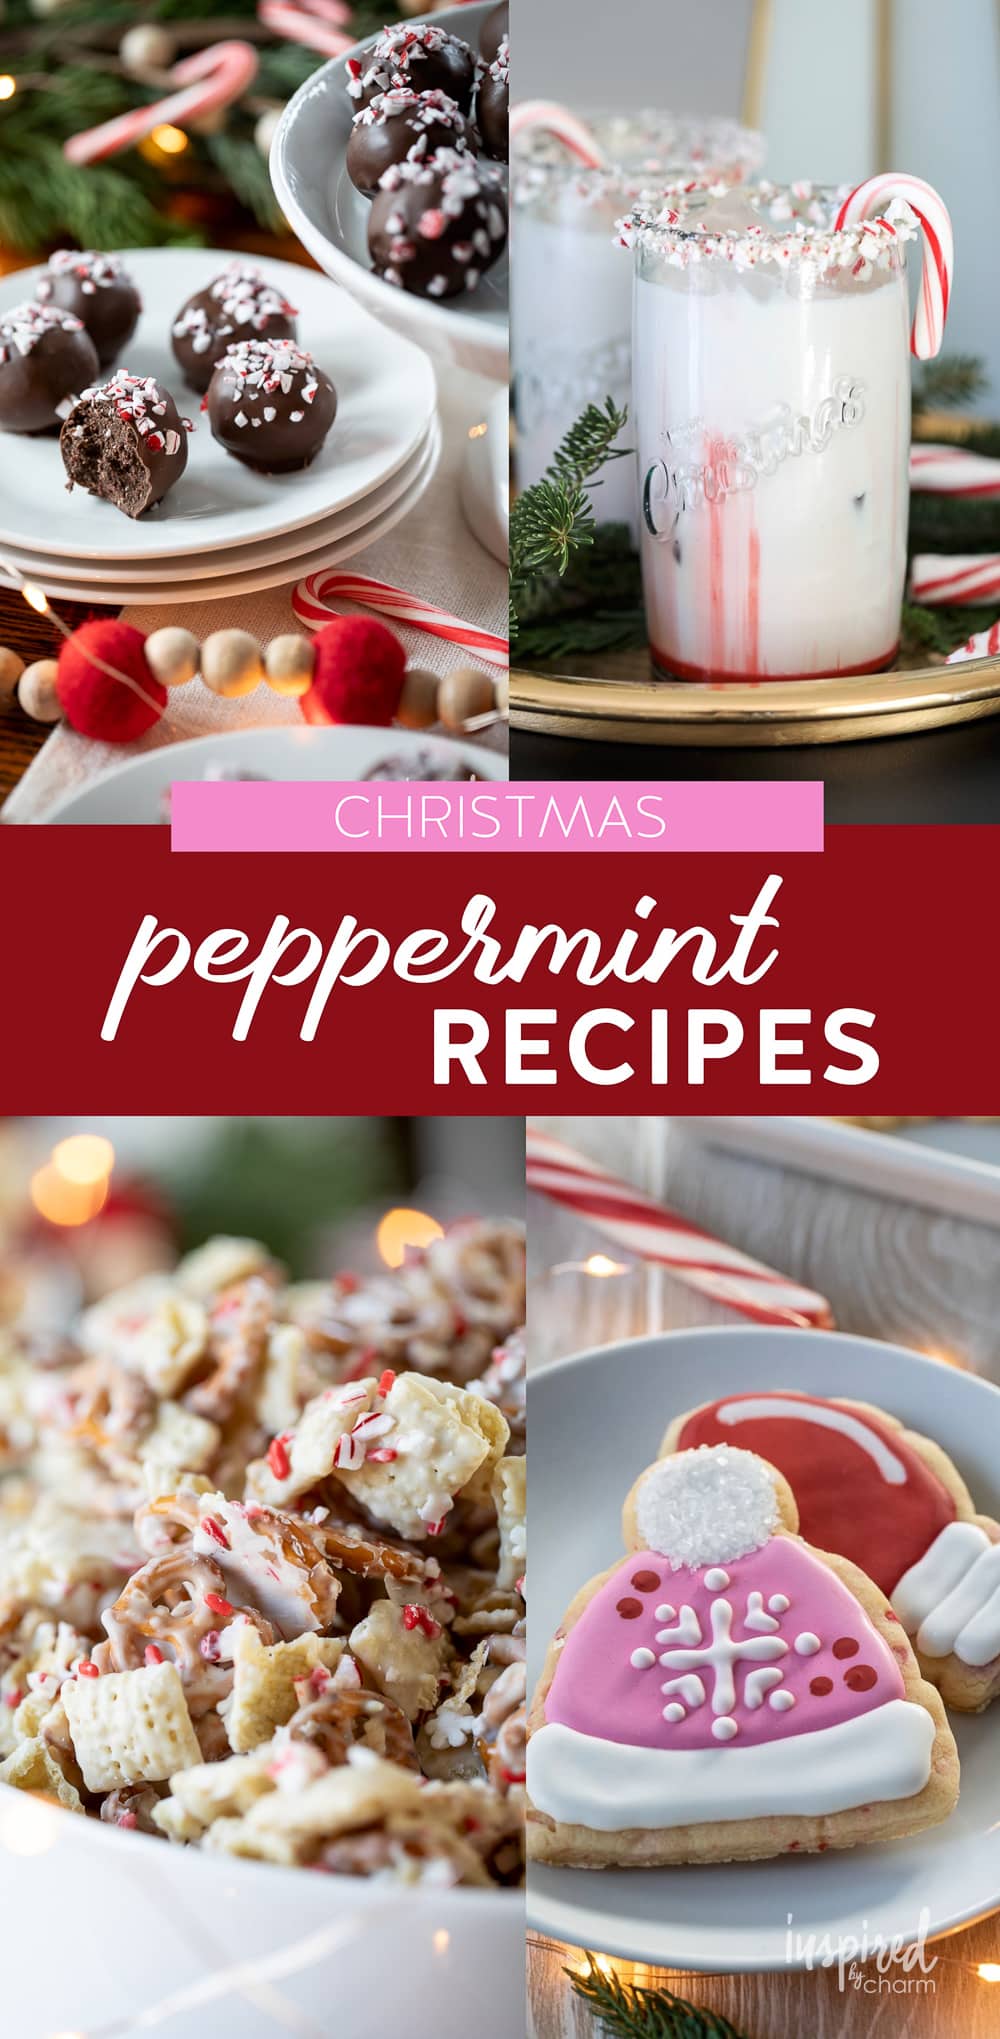 Merry & Minty: Irresistible Peppermint Recipes for Christmas